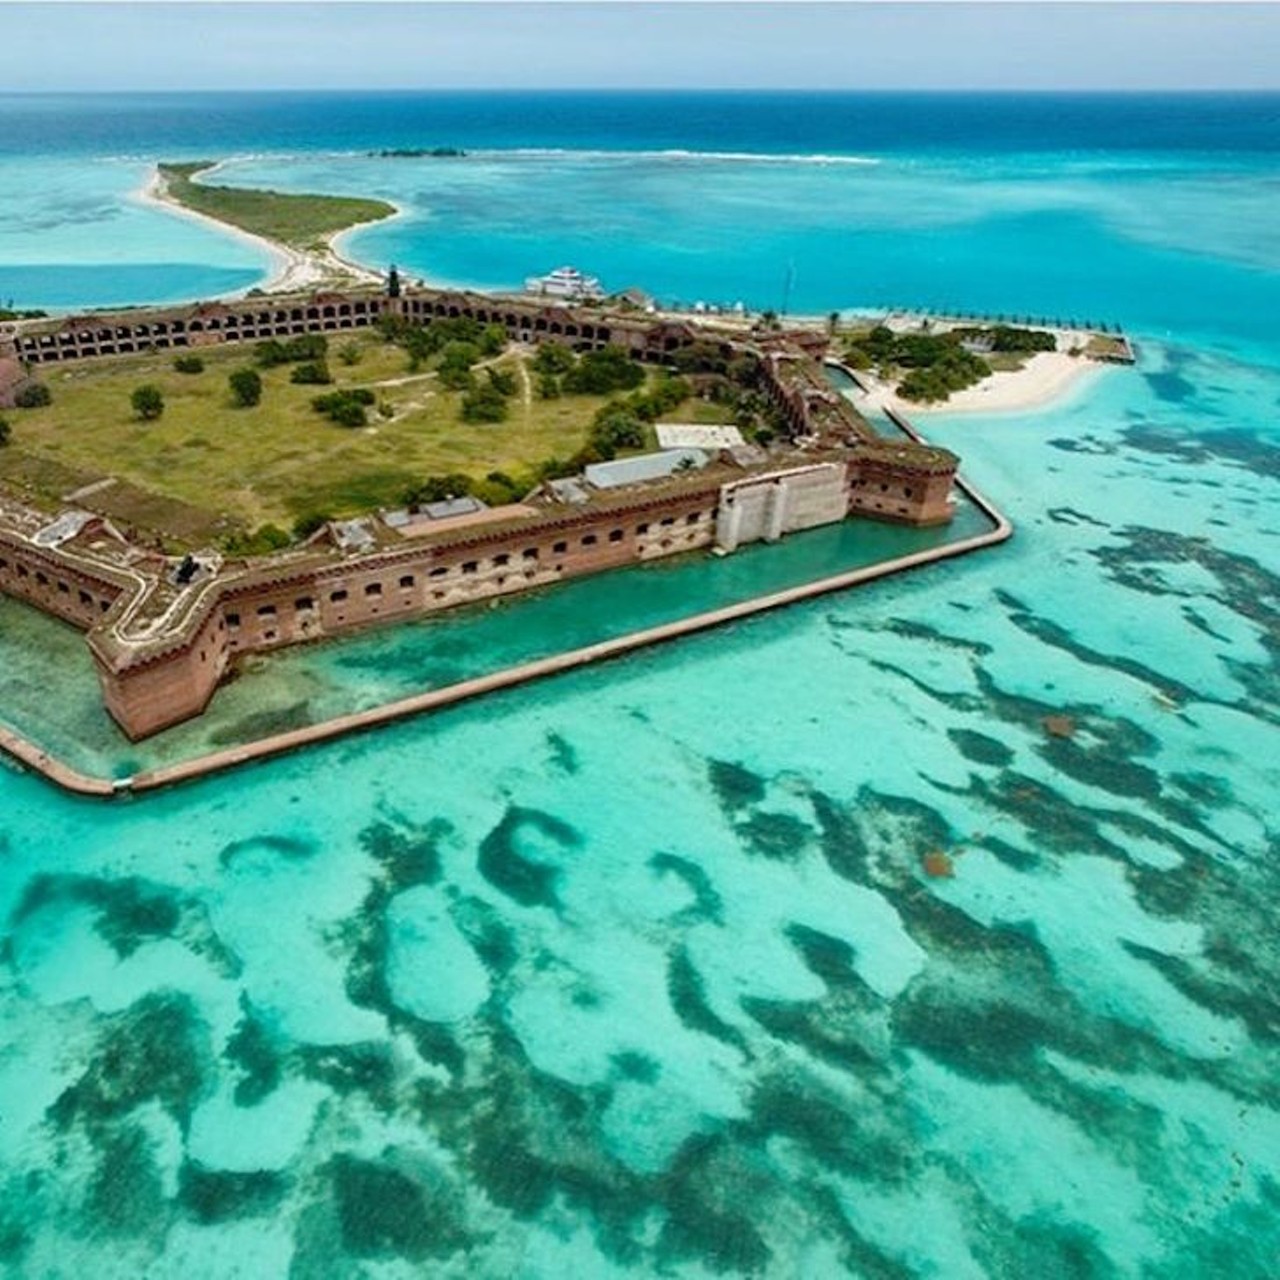 Dry Tortugas National Park
Distance: 6 hours, 48 minutes
It&#146;s hard to say &#147;no&#148; to camping on an island with warm tropical breezes that is 70 miles away from civilization. Be sure to make a reservation before camping at Fort Jefferson in Dry Tortugas National Park because the popular destination tends to fill up, and the 11 campsites run on a first come, first served basis. Campsites range from $15 to $30, depending on the size of your group.
Photo via enjoy_miami_/Instagram